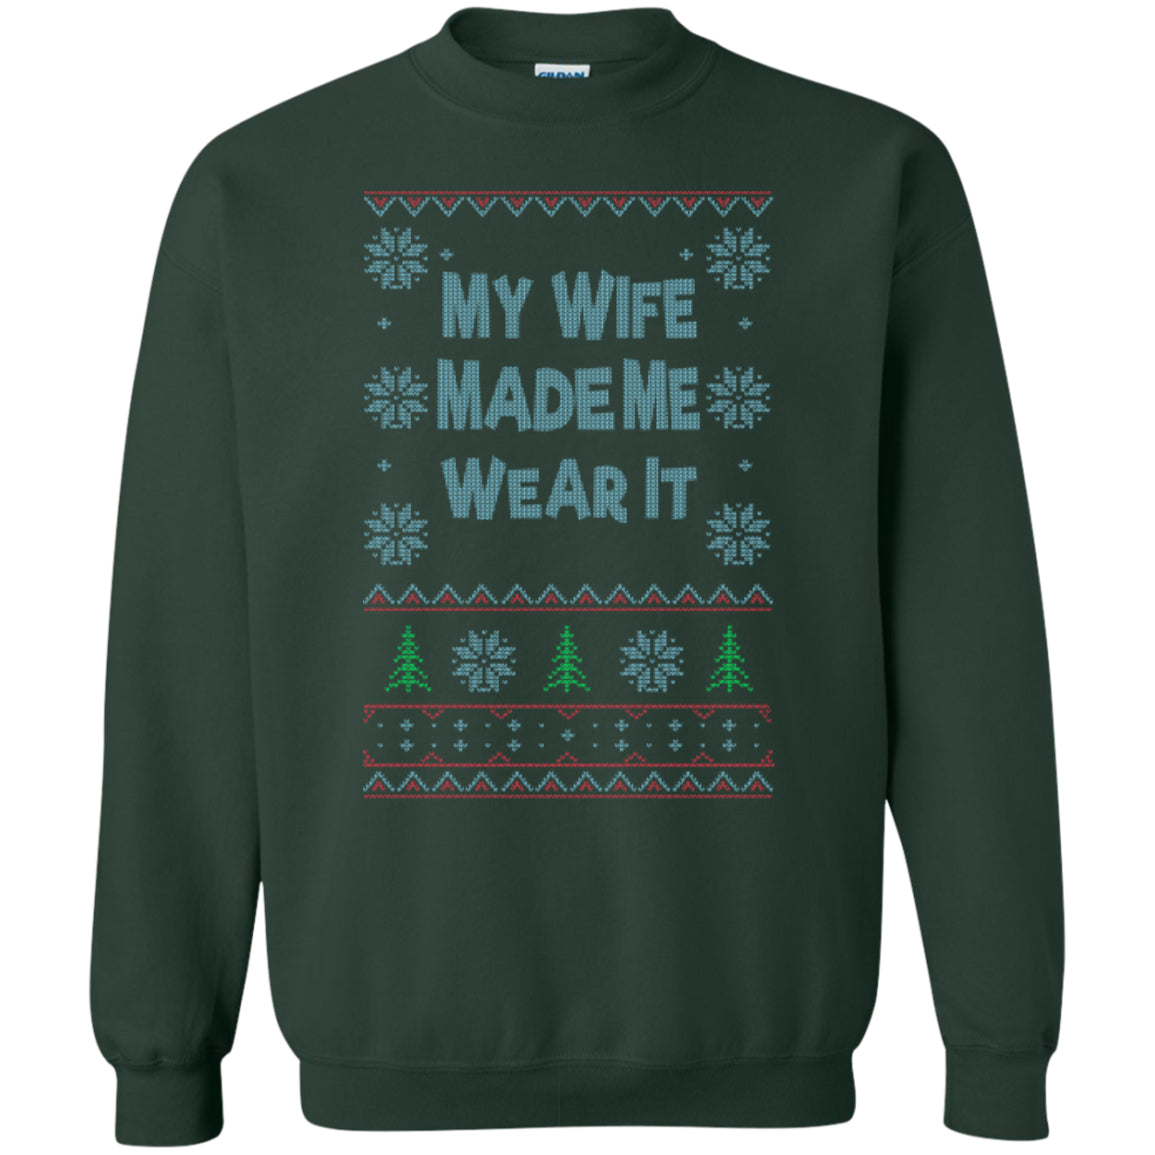 My WIFE Made Me Wear It - Printed Crewneck Pullover Sweatshirt  8 oz - GoneBold.gift